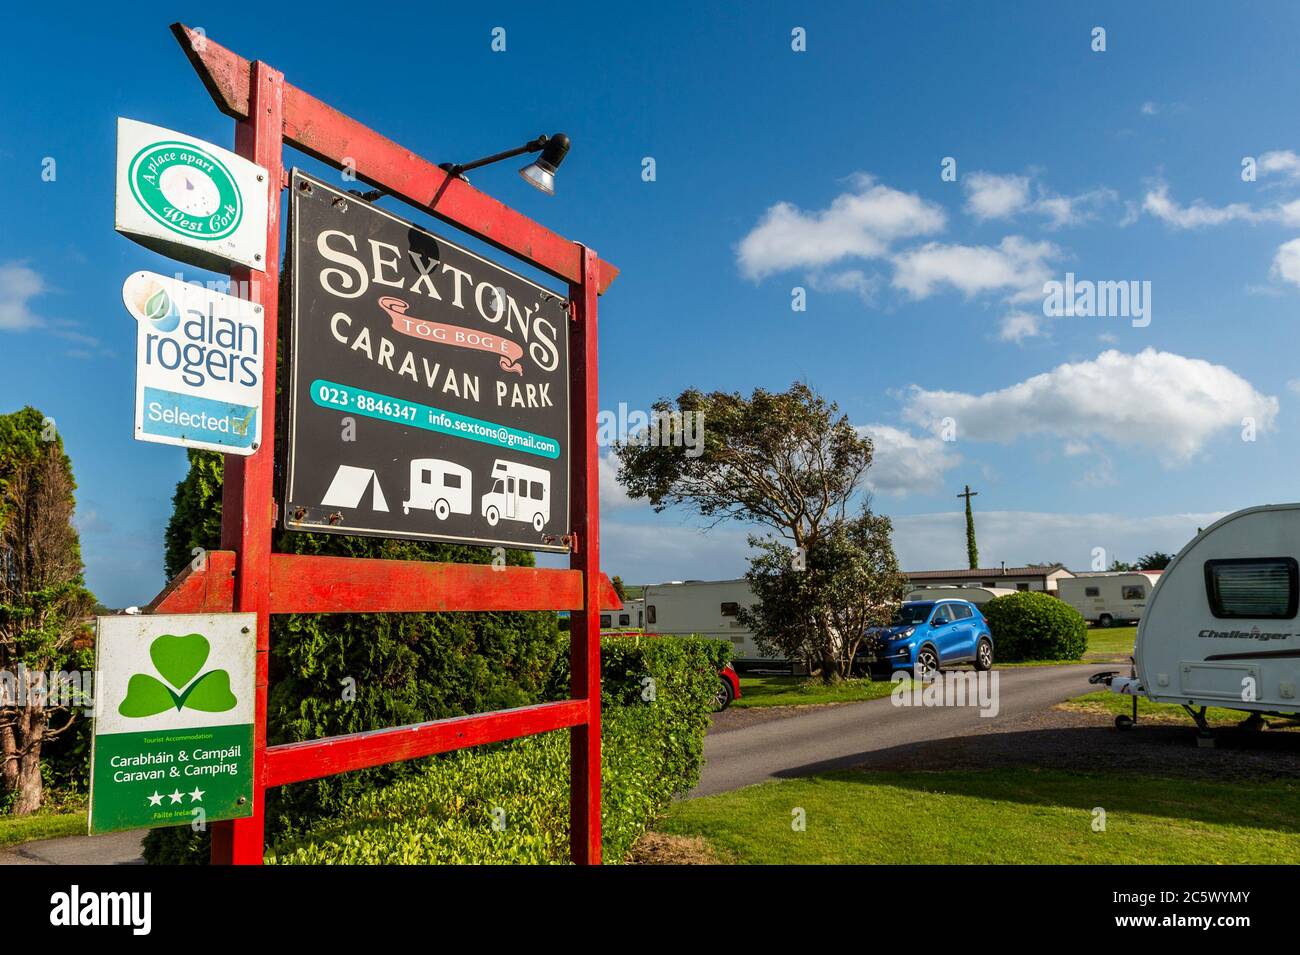 Timoleague, West Cork, Ireland. 5th July, 2020. Sexton's Caravan Park in Timoleague was full of caravans, motor homes and tents this weekend after reopening on Monday 29th June for the first time this year. Credit: AG News/Alamy Live News Stock Photo